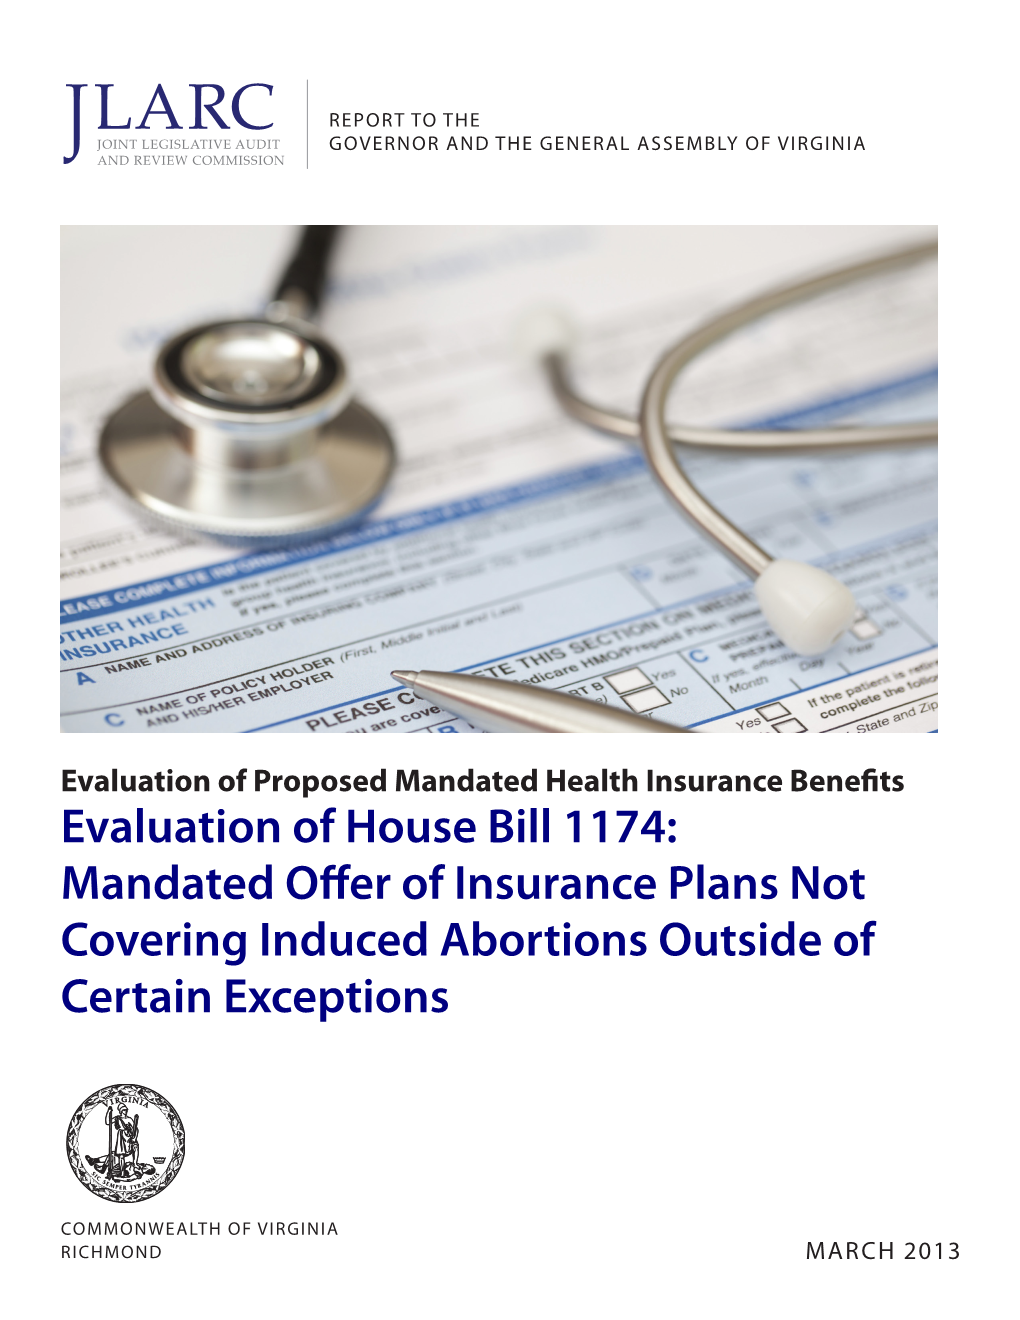 Mandated Offer of Insurance Plans Not Covering Induced Abortions Outside of Certain Exceptions